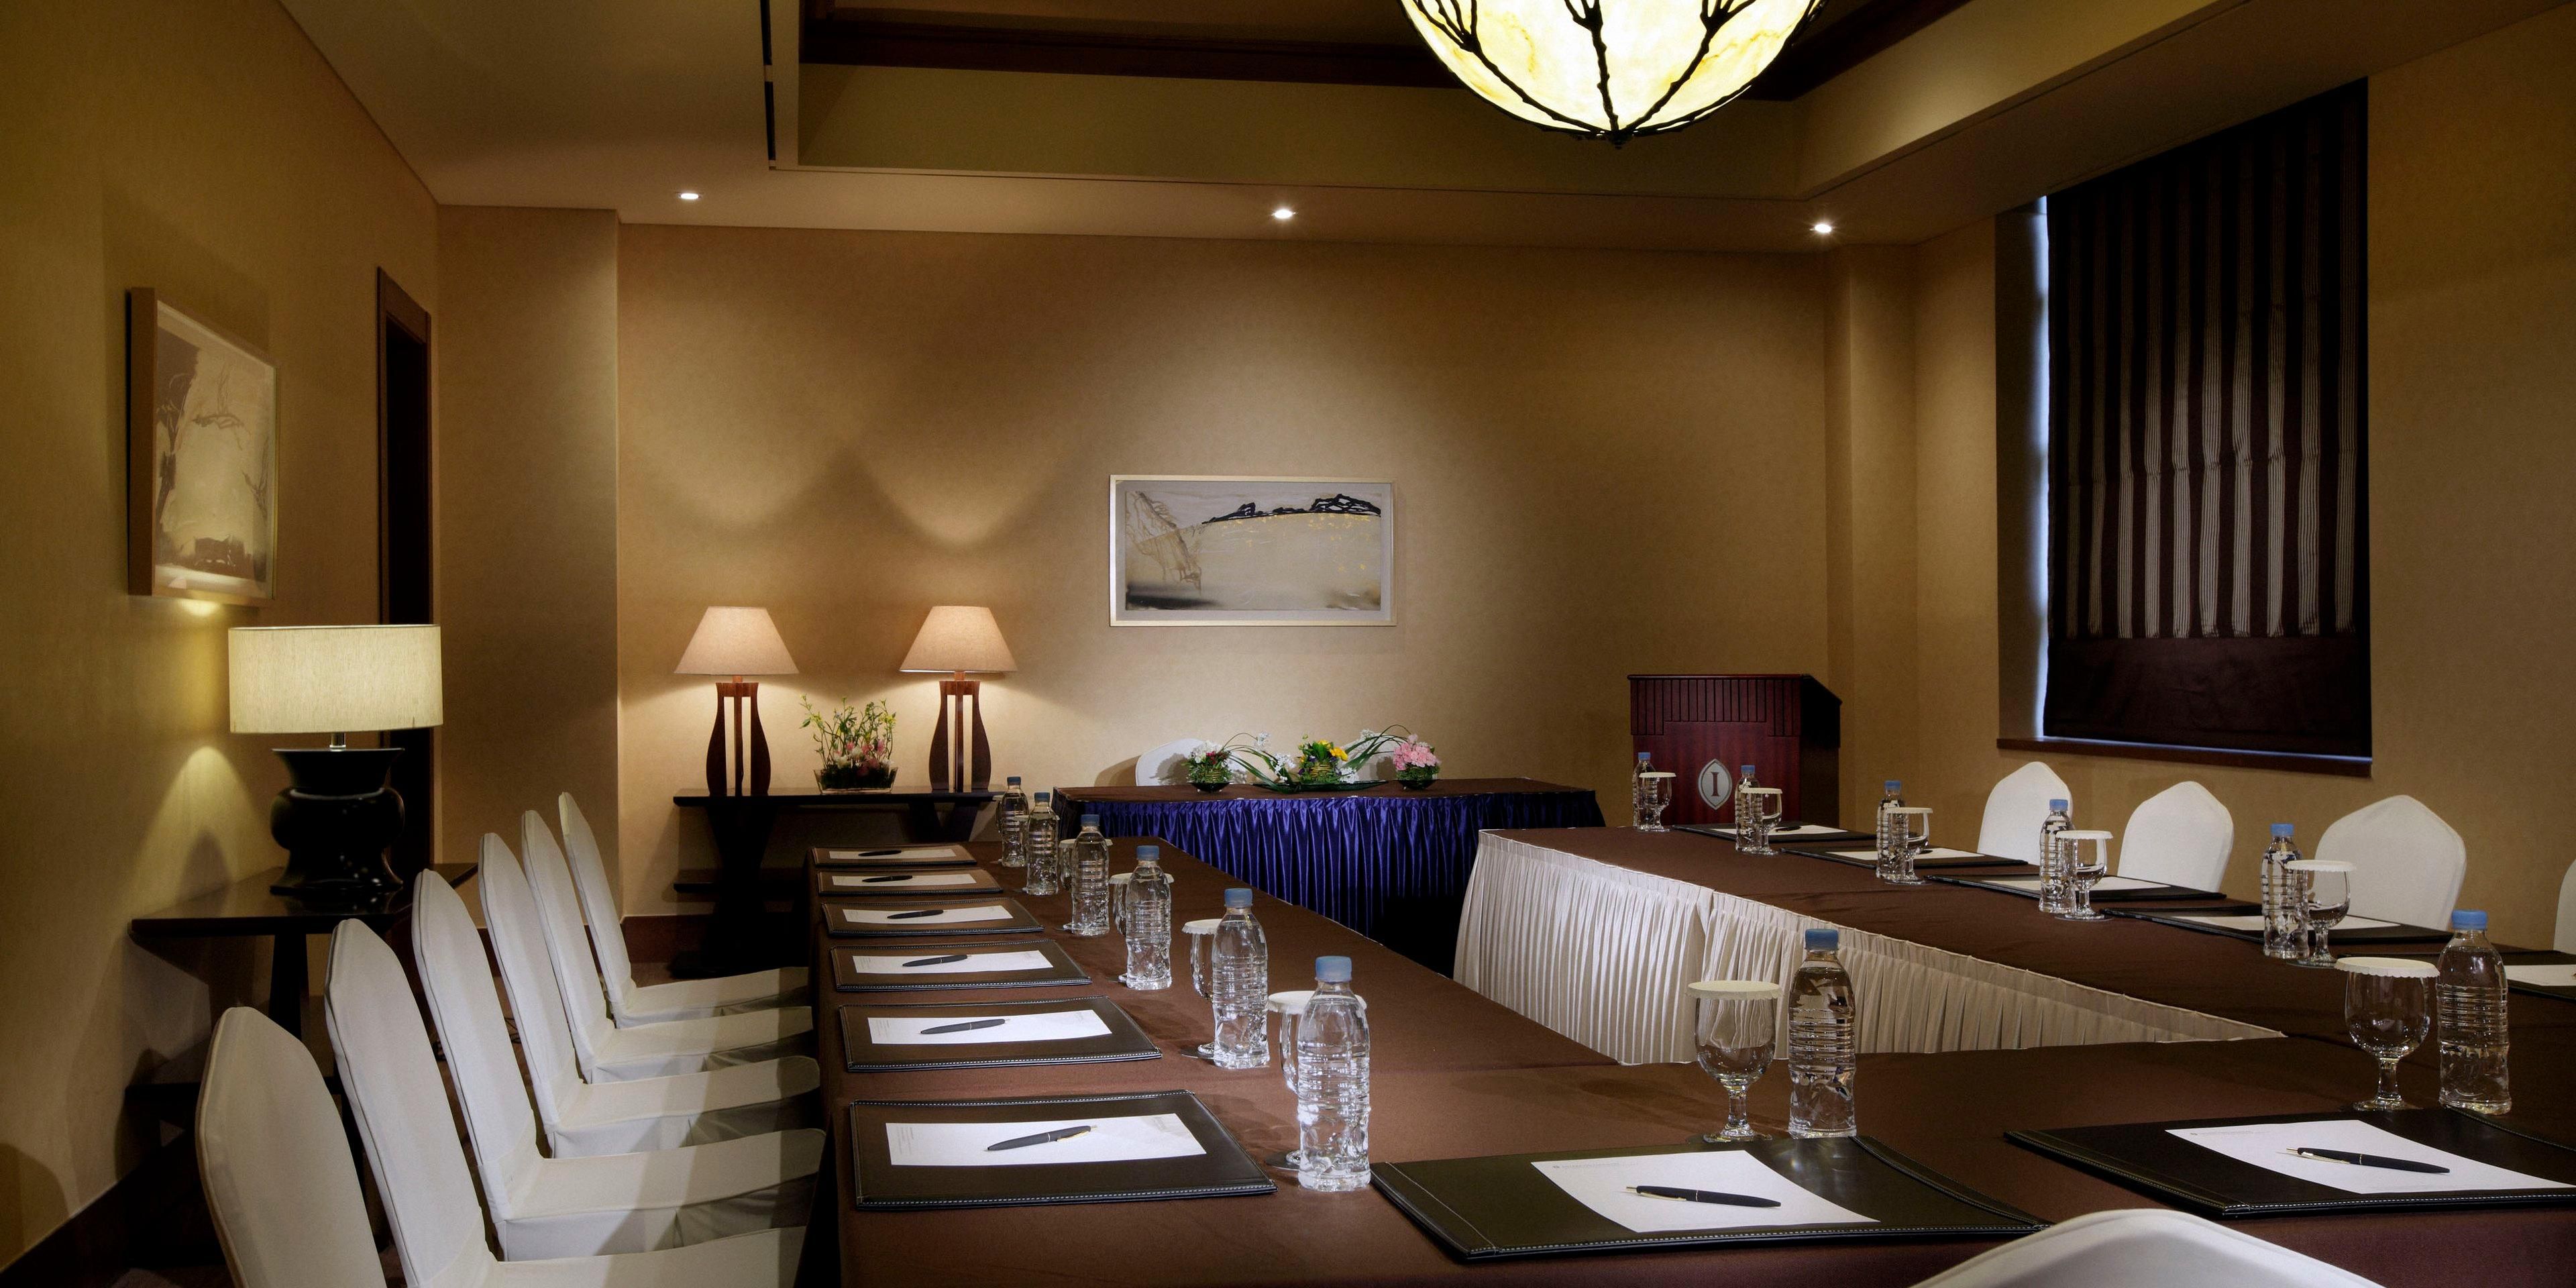 Our experienced event staff is ready to turn your ideas into reality. Whether you're planning a private meeting or large-scale conference, we have the space to make your event unforgettable.